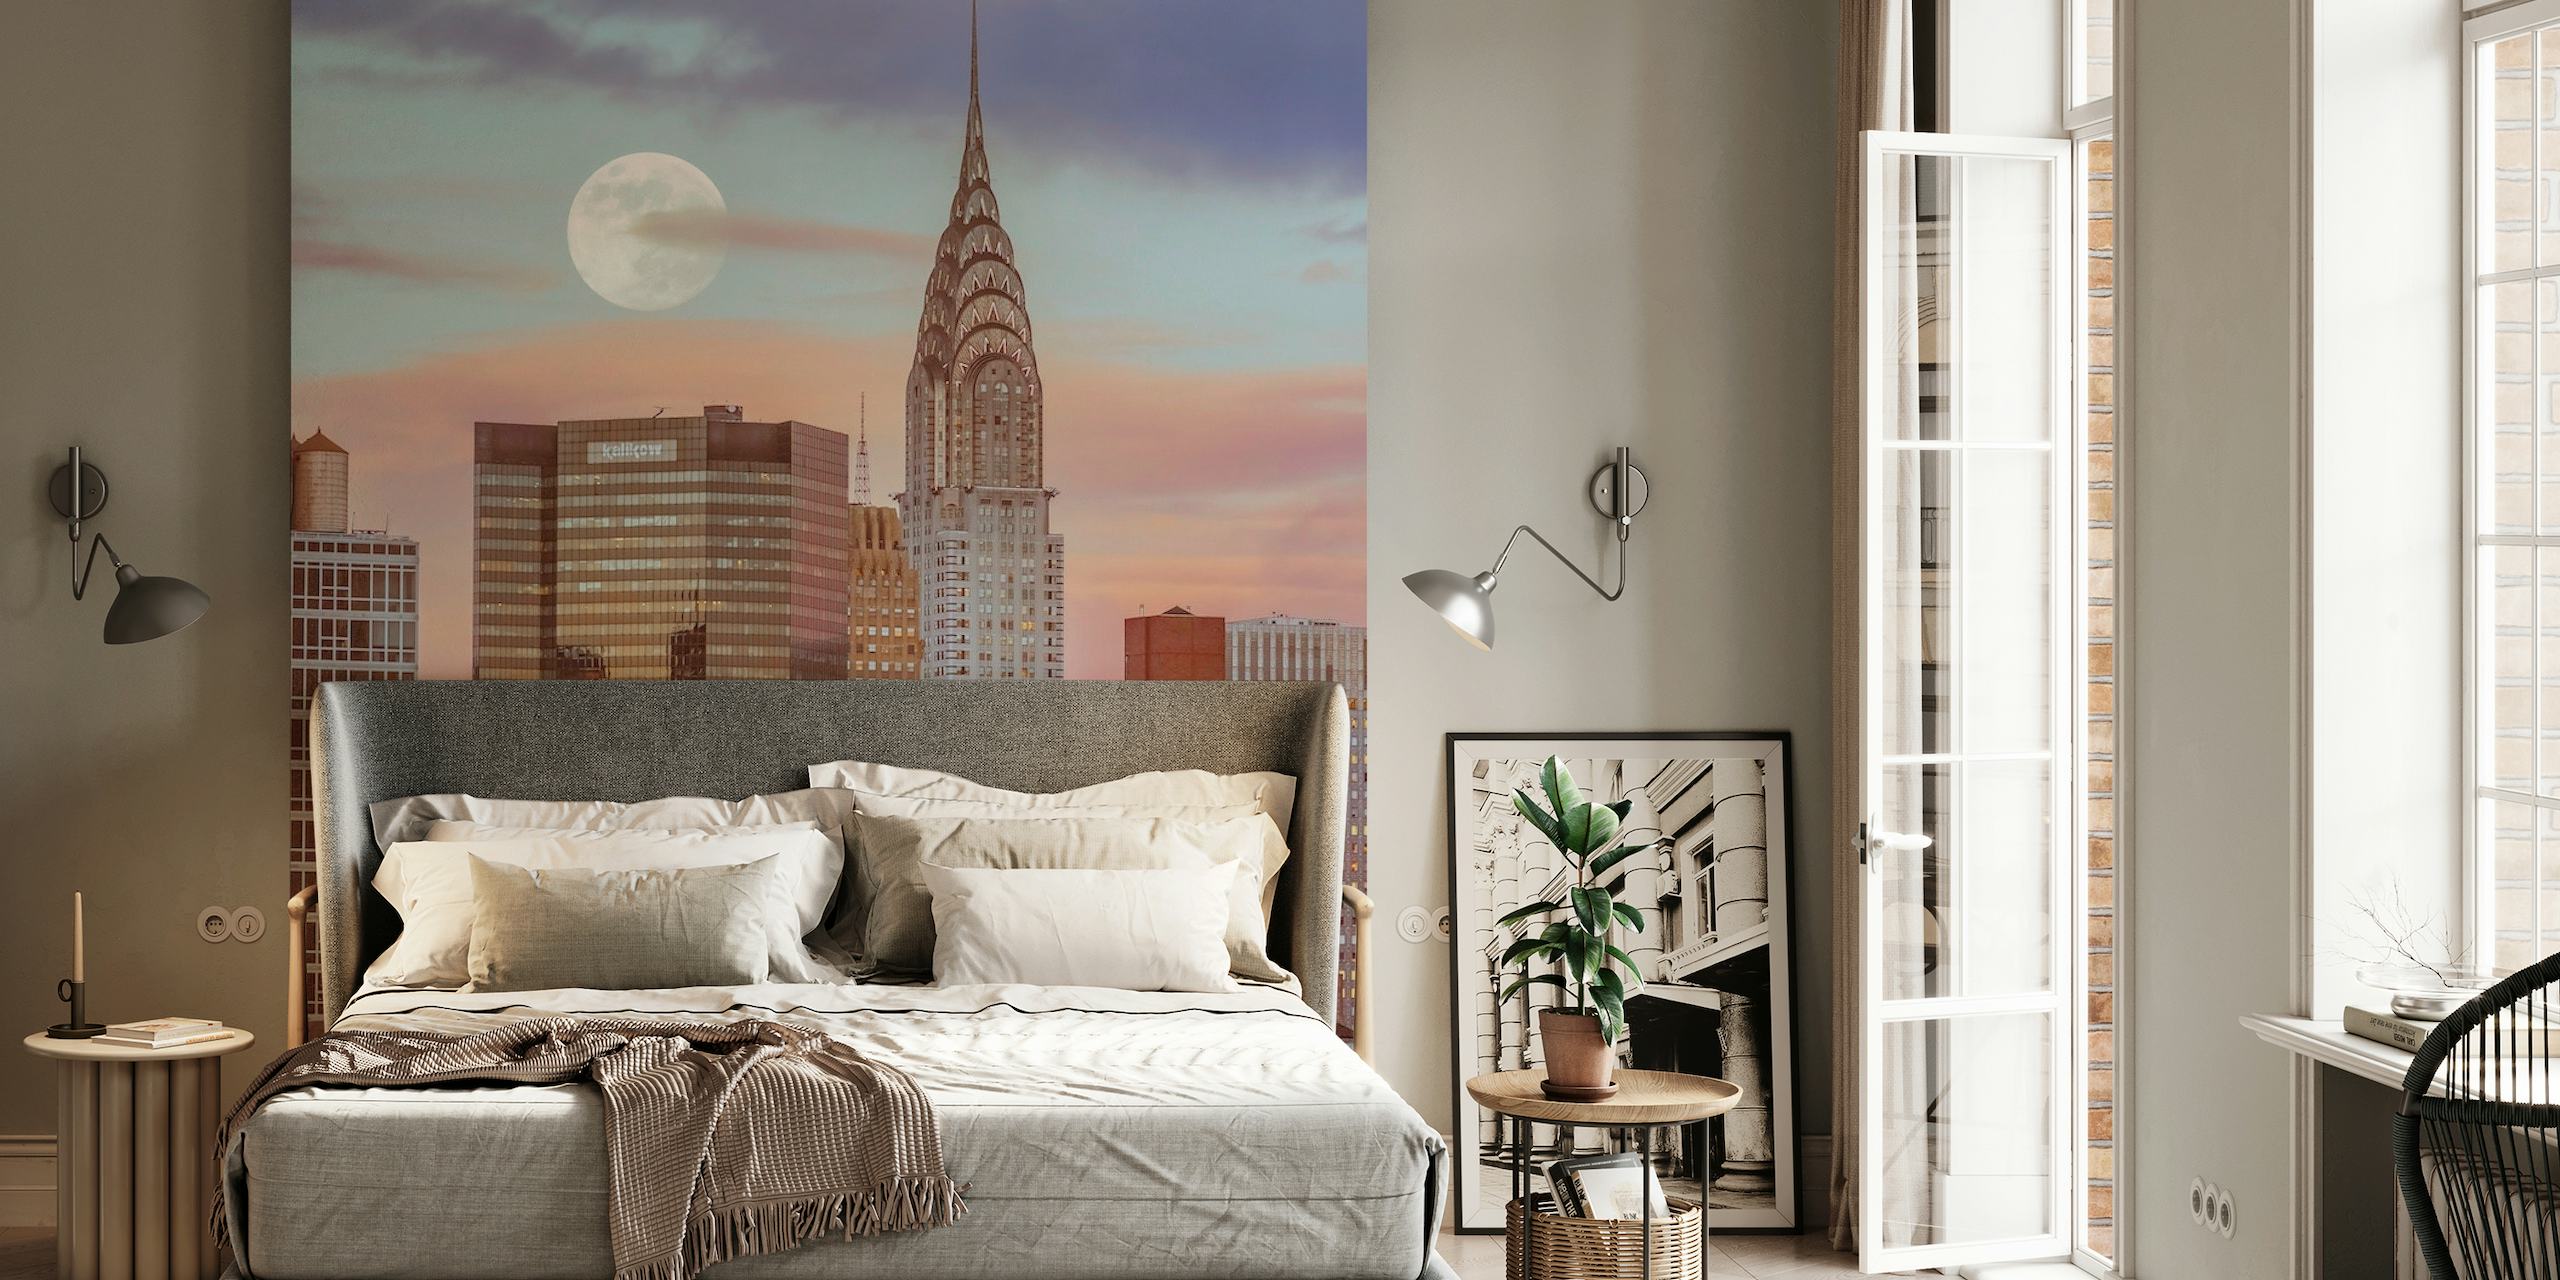 Chrysler Building wall mural with cityscape and dusk sky